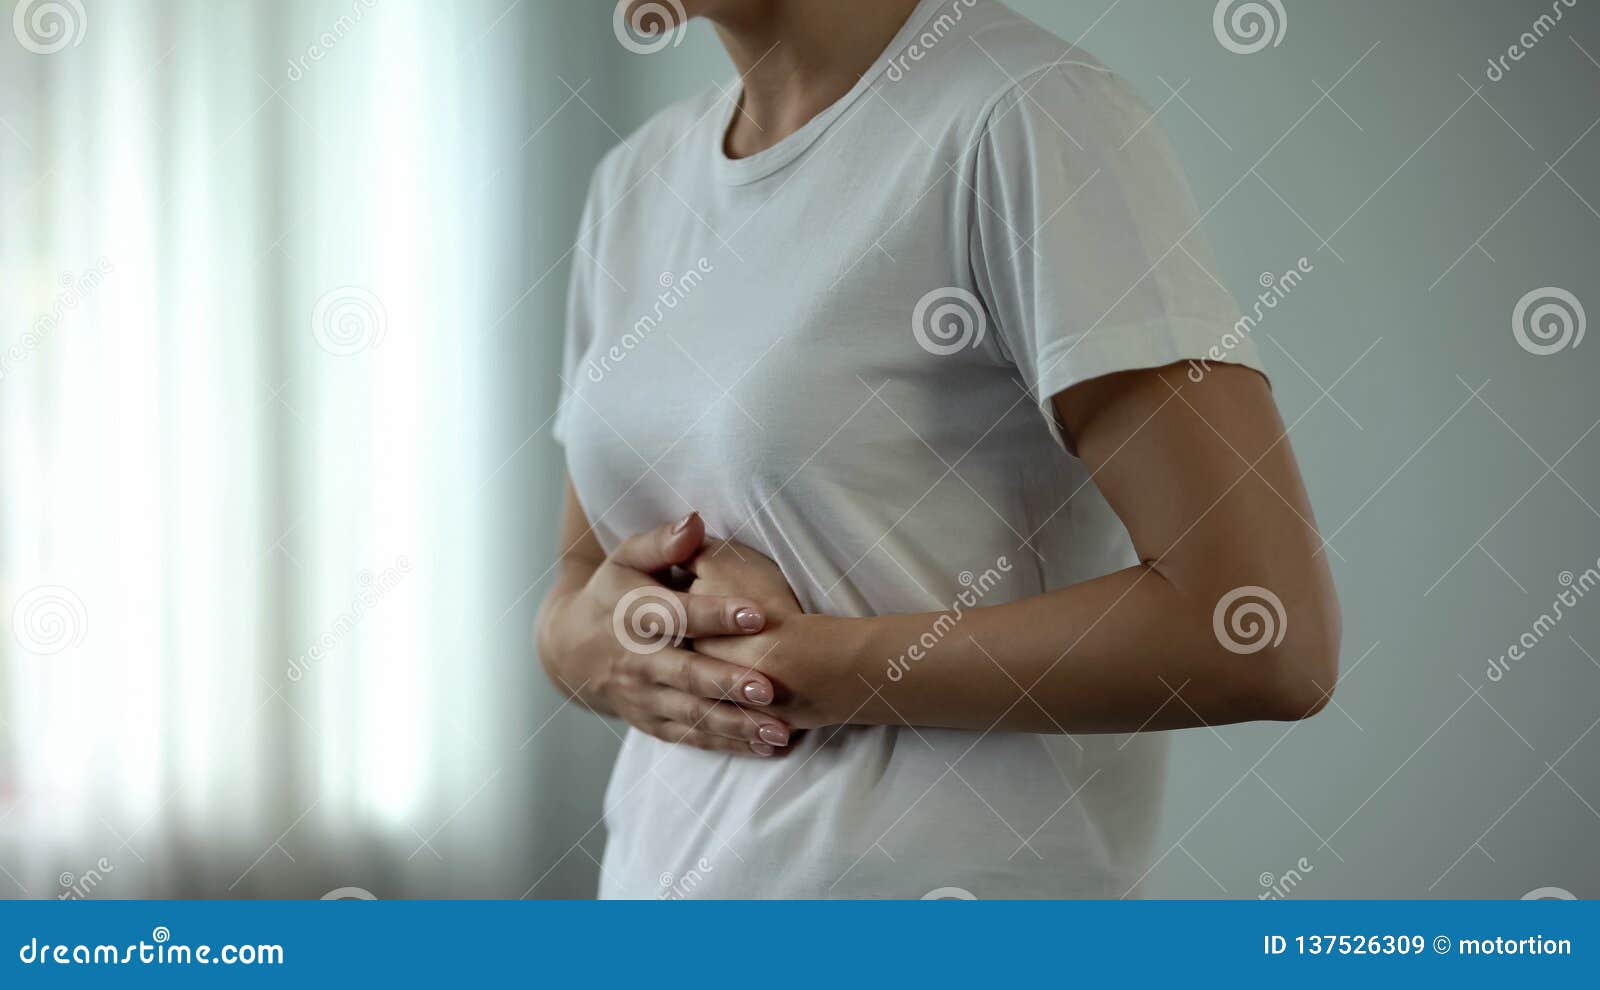 woman with stomach pain touching tummy, suffering from gastritis, pancreatitis